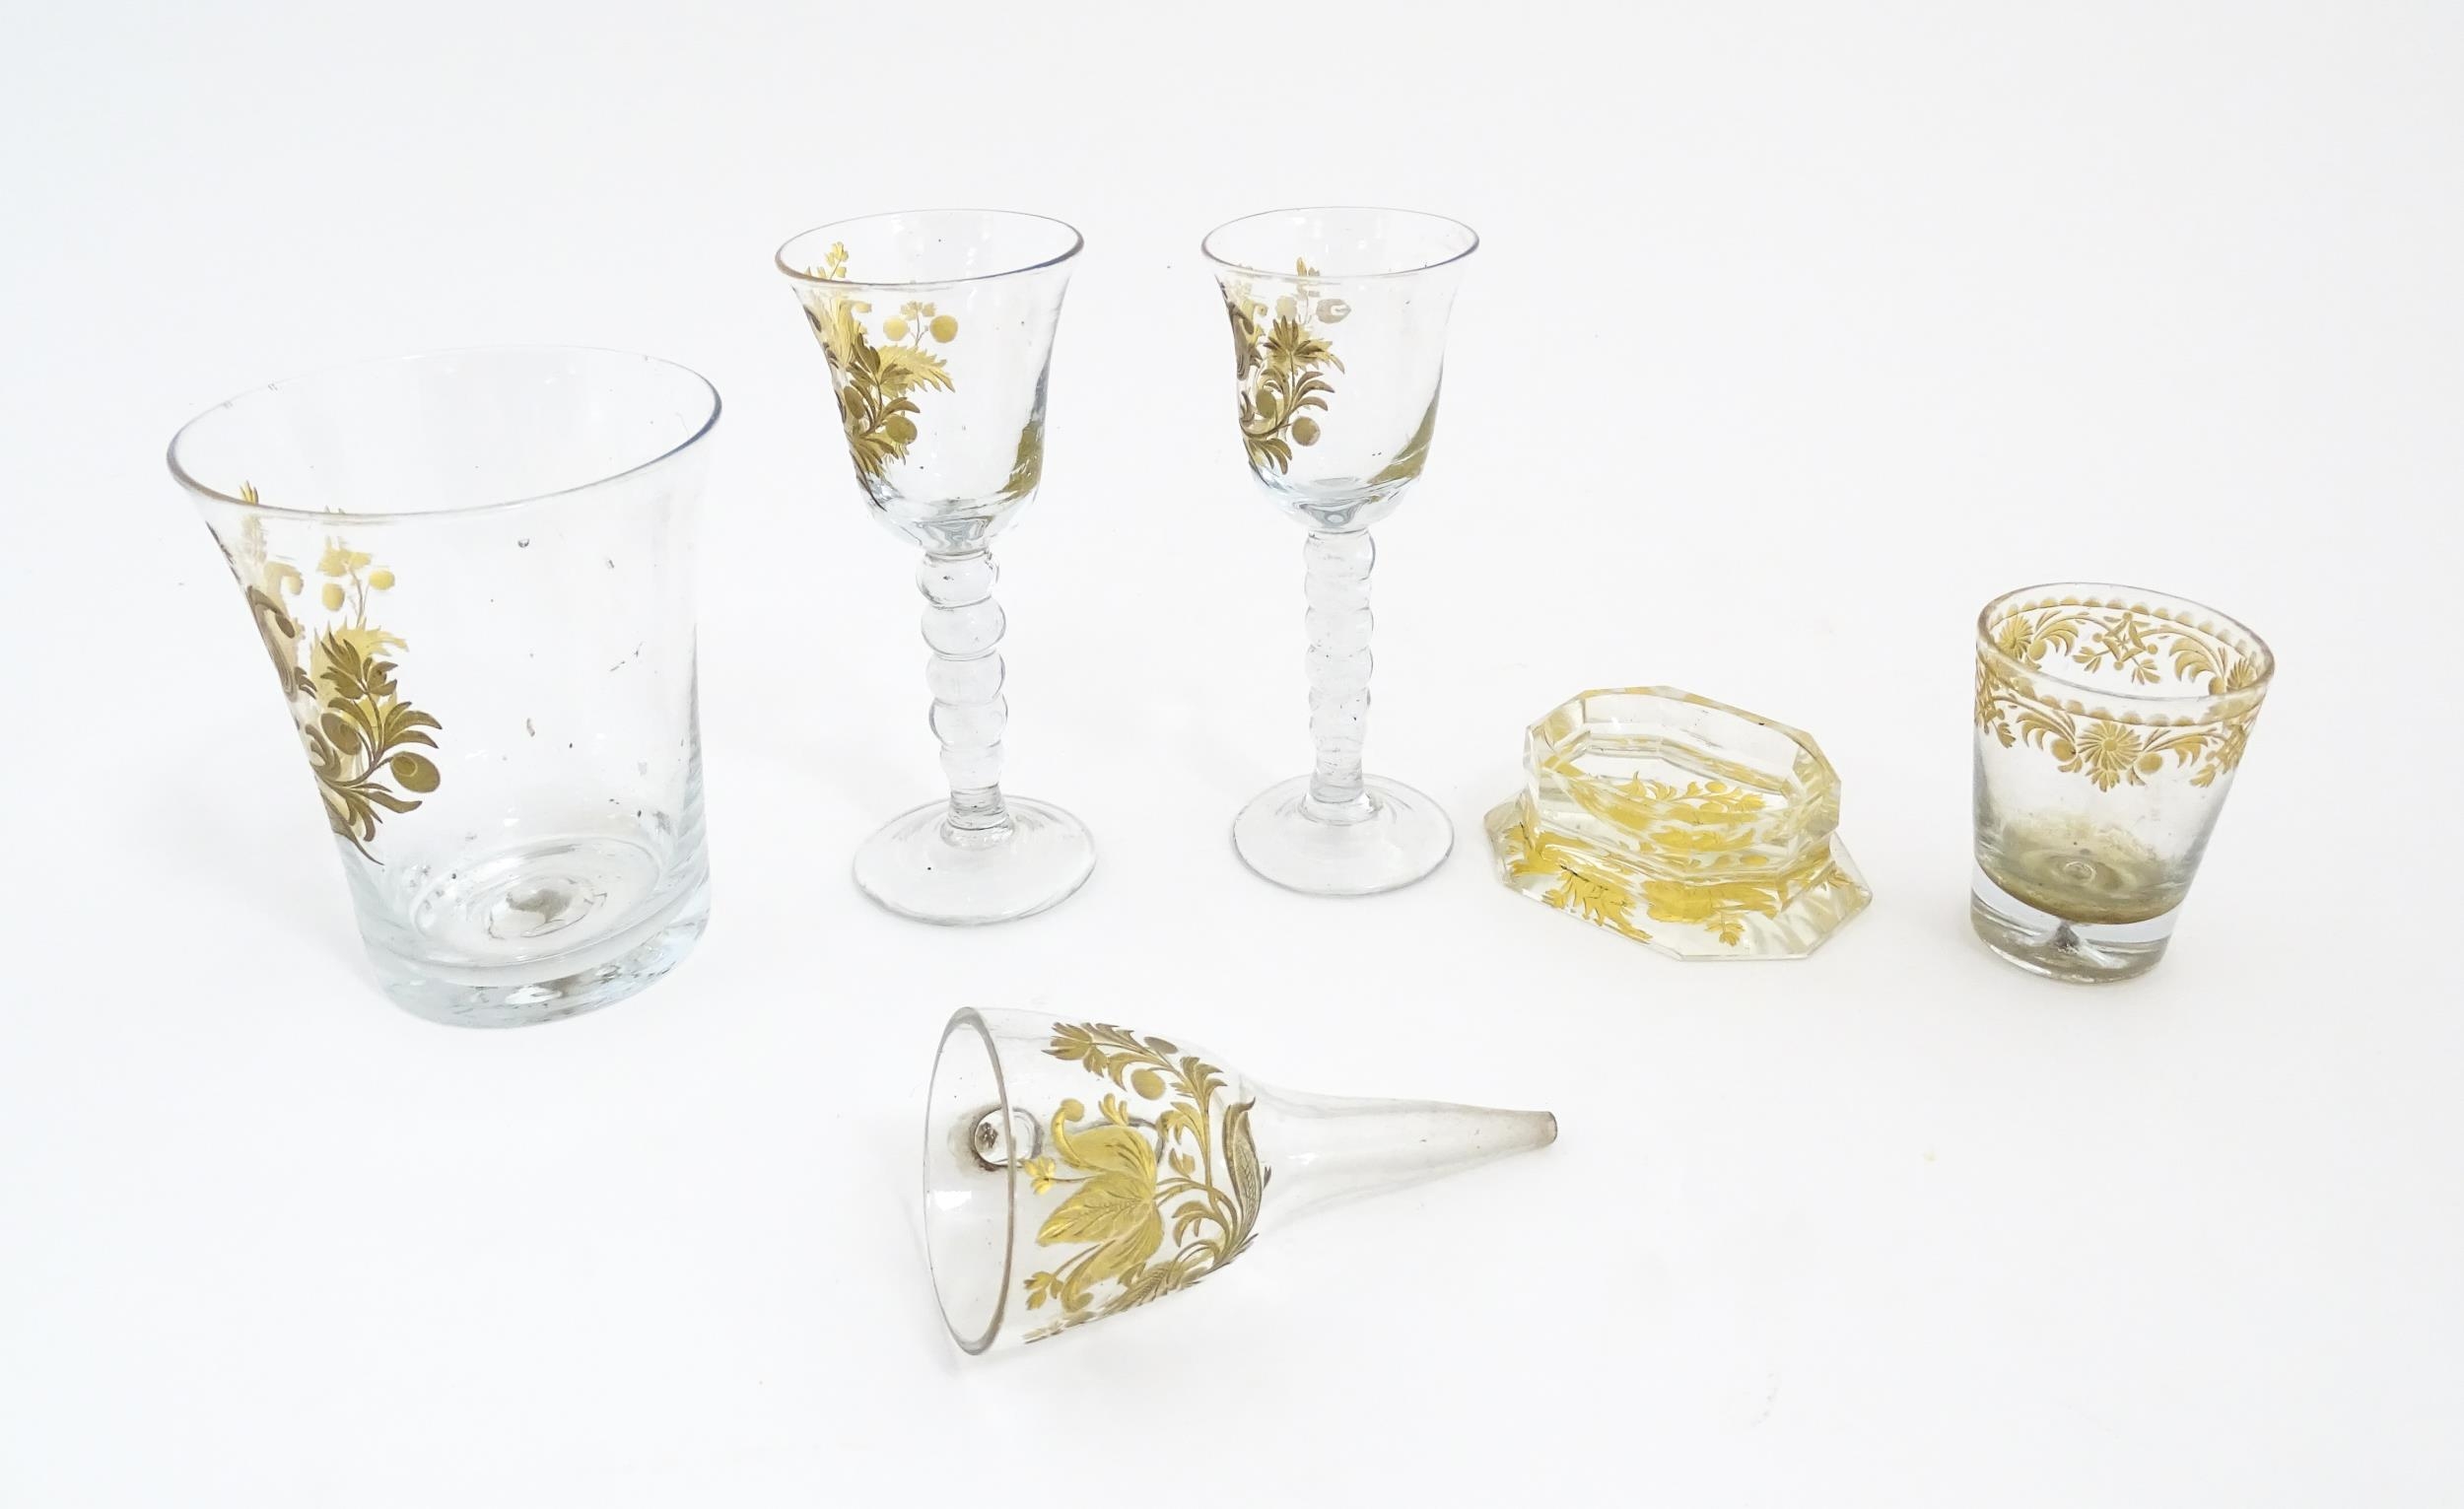 18thC glass to include 18thC wine glasses, beakers, funnel, etc. with engraved gilt foliate and - Image 10 of 11